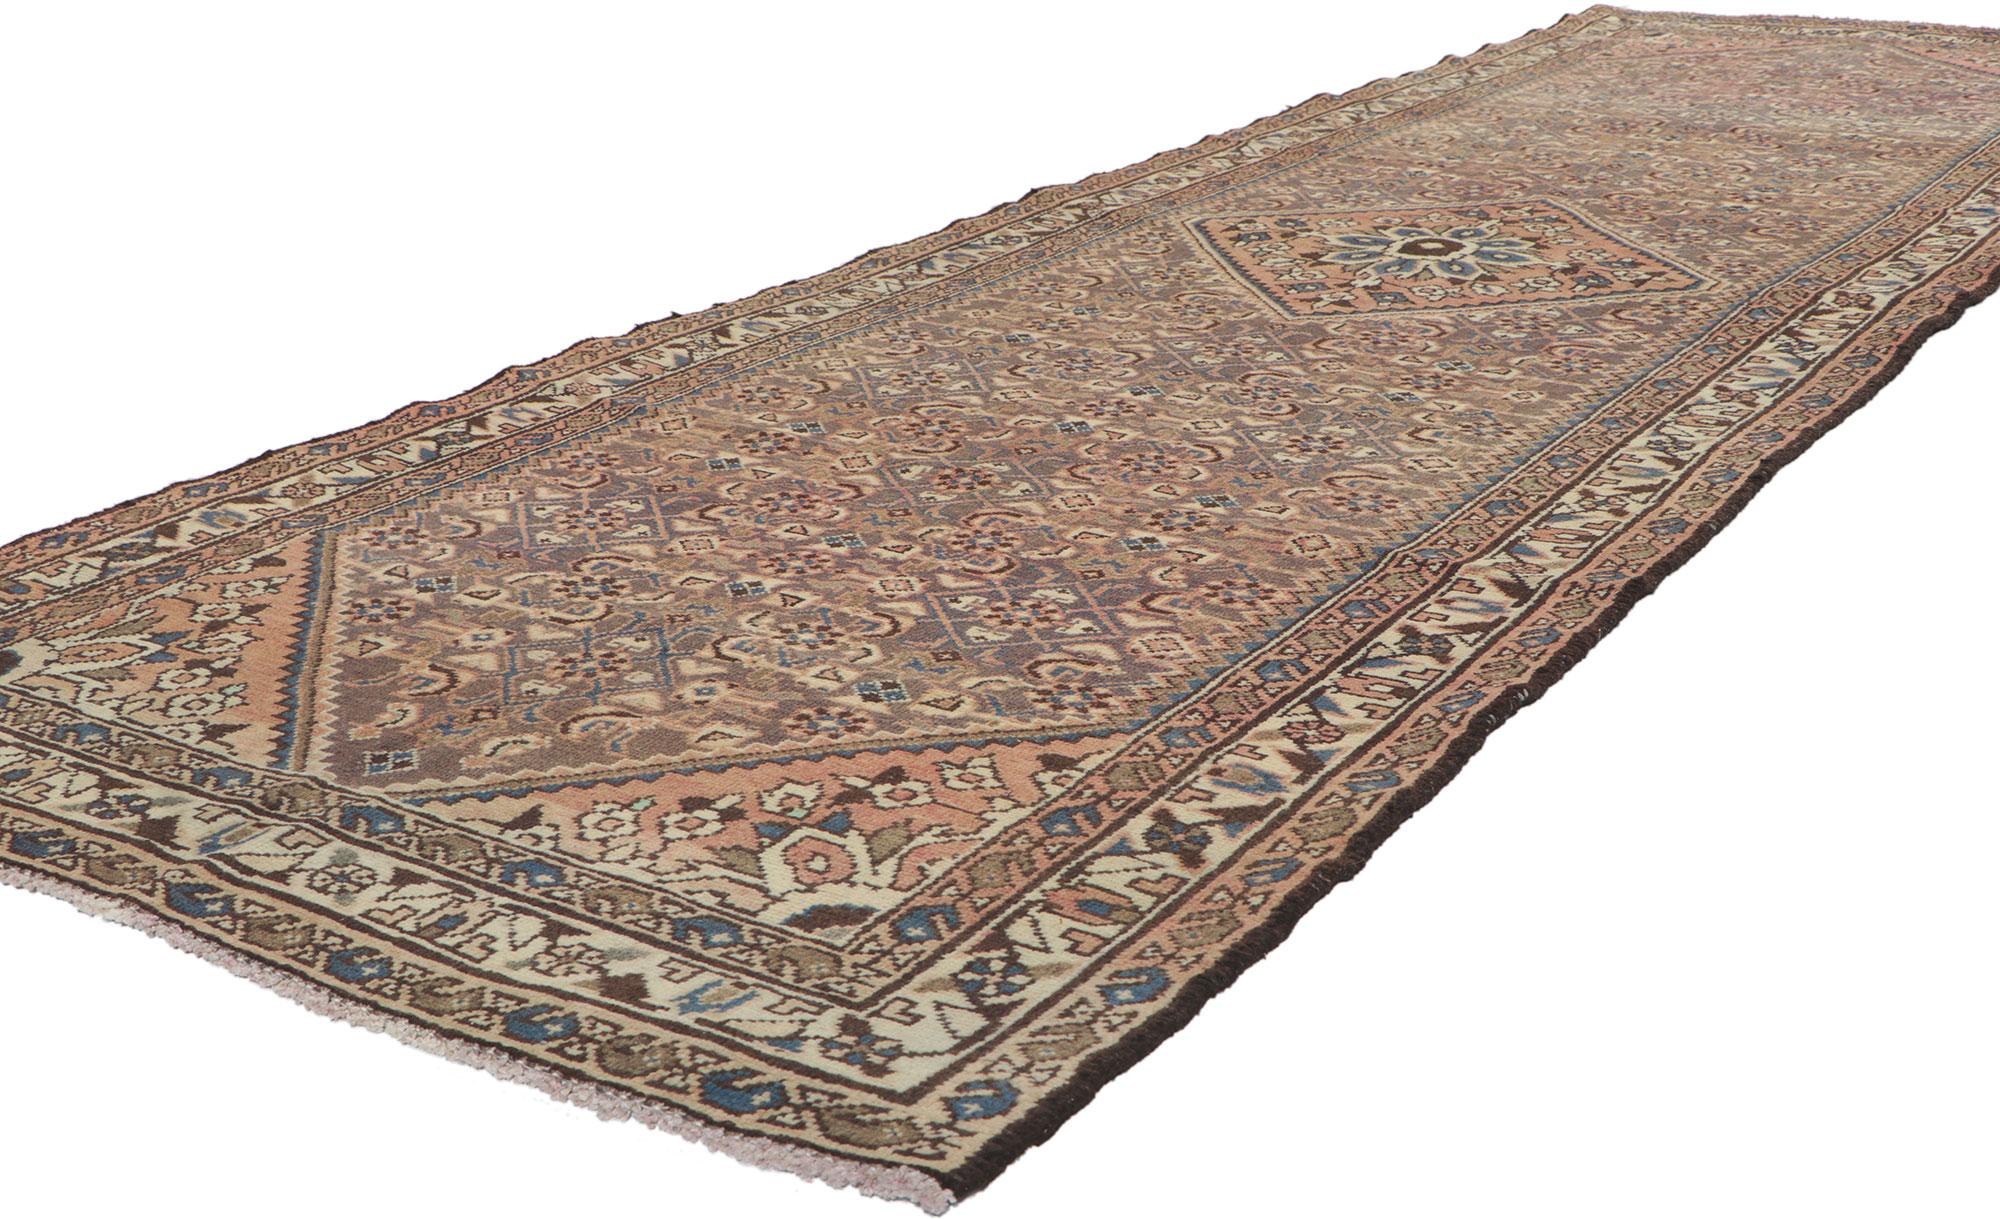 61088 Vintage Persian Malayer Runner with Herati Design 03'03 x 10'06. With its effortless beauty and timeless design, this hand knotted wool antique Persian Mahal carpet runner will take on a curated lived-in look that feels timeless while